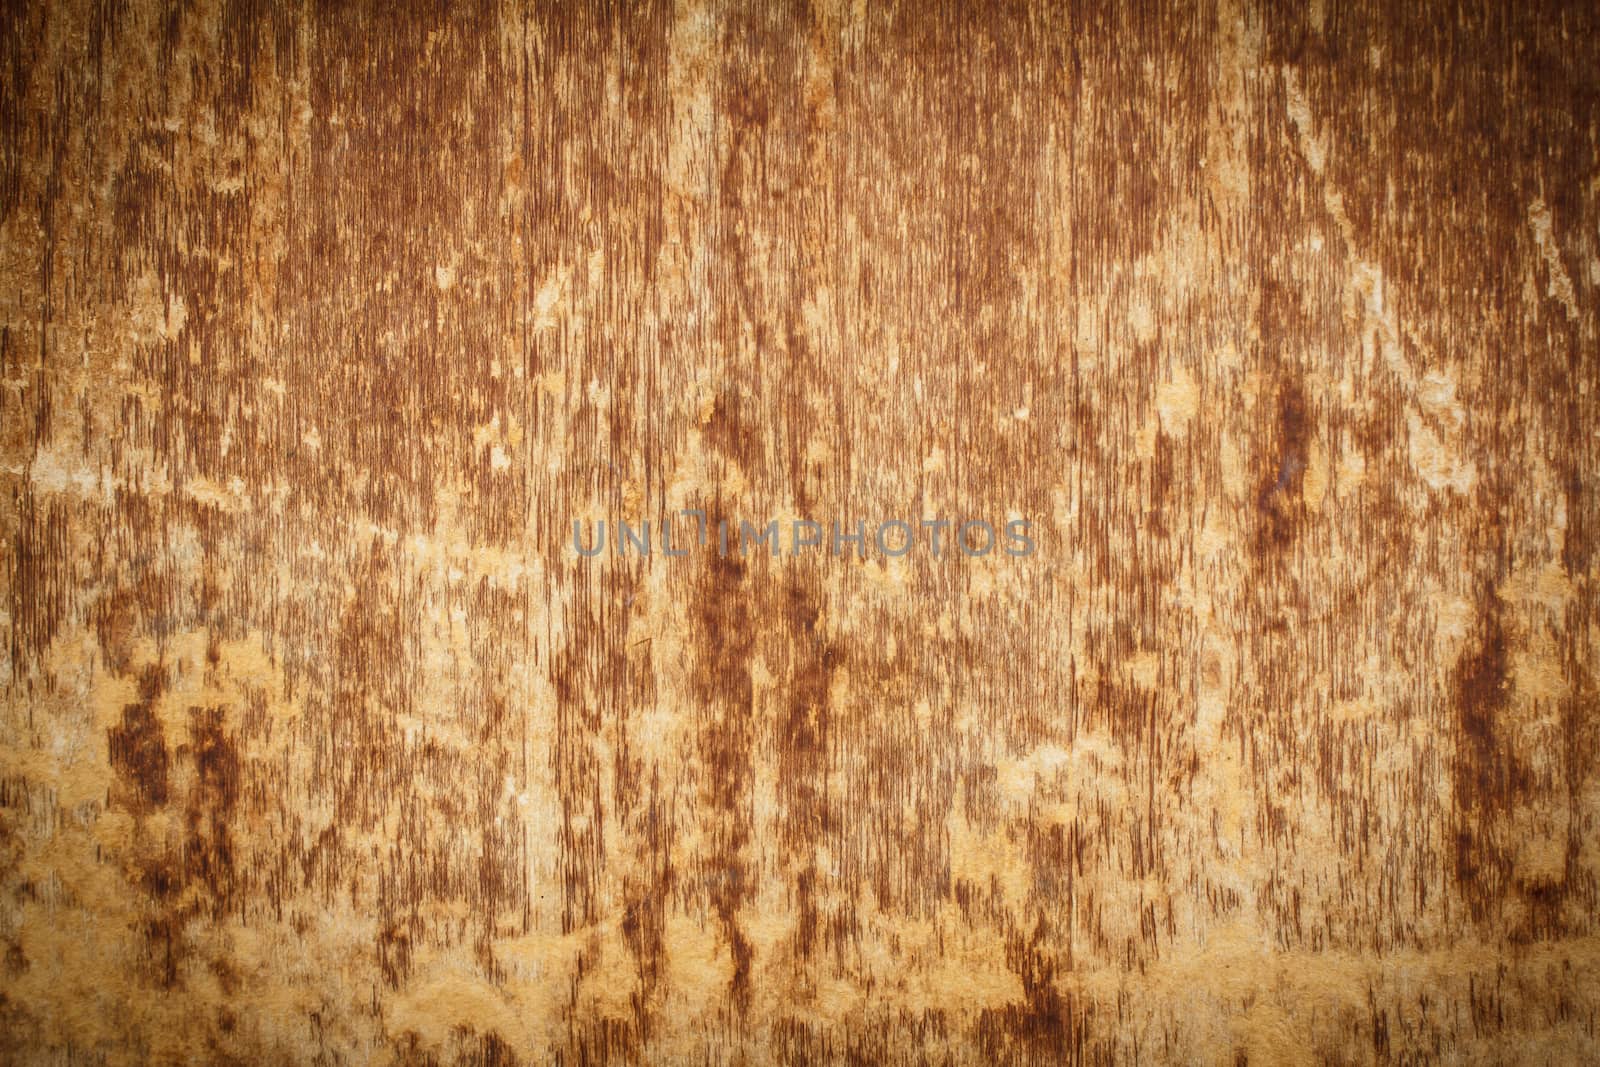 wood grungy background by vitawin